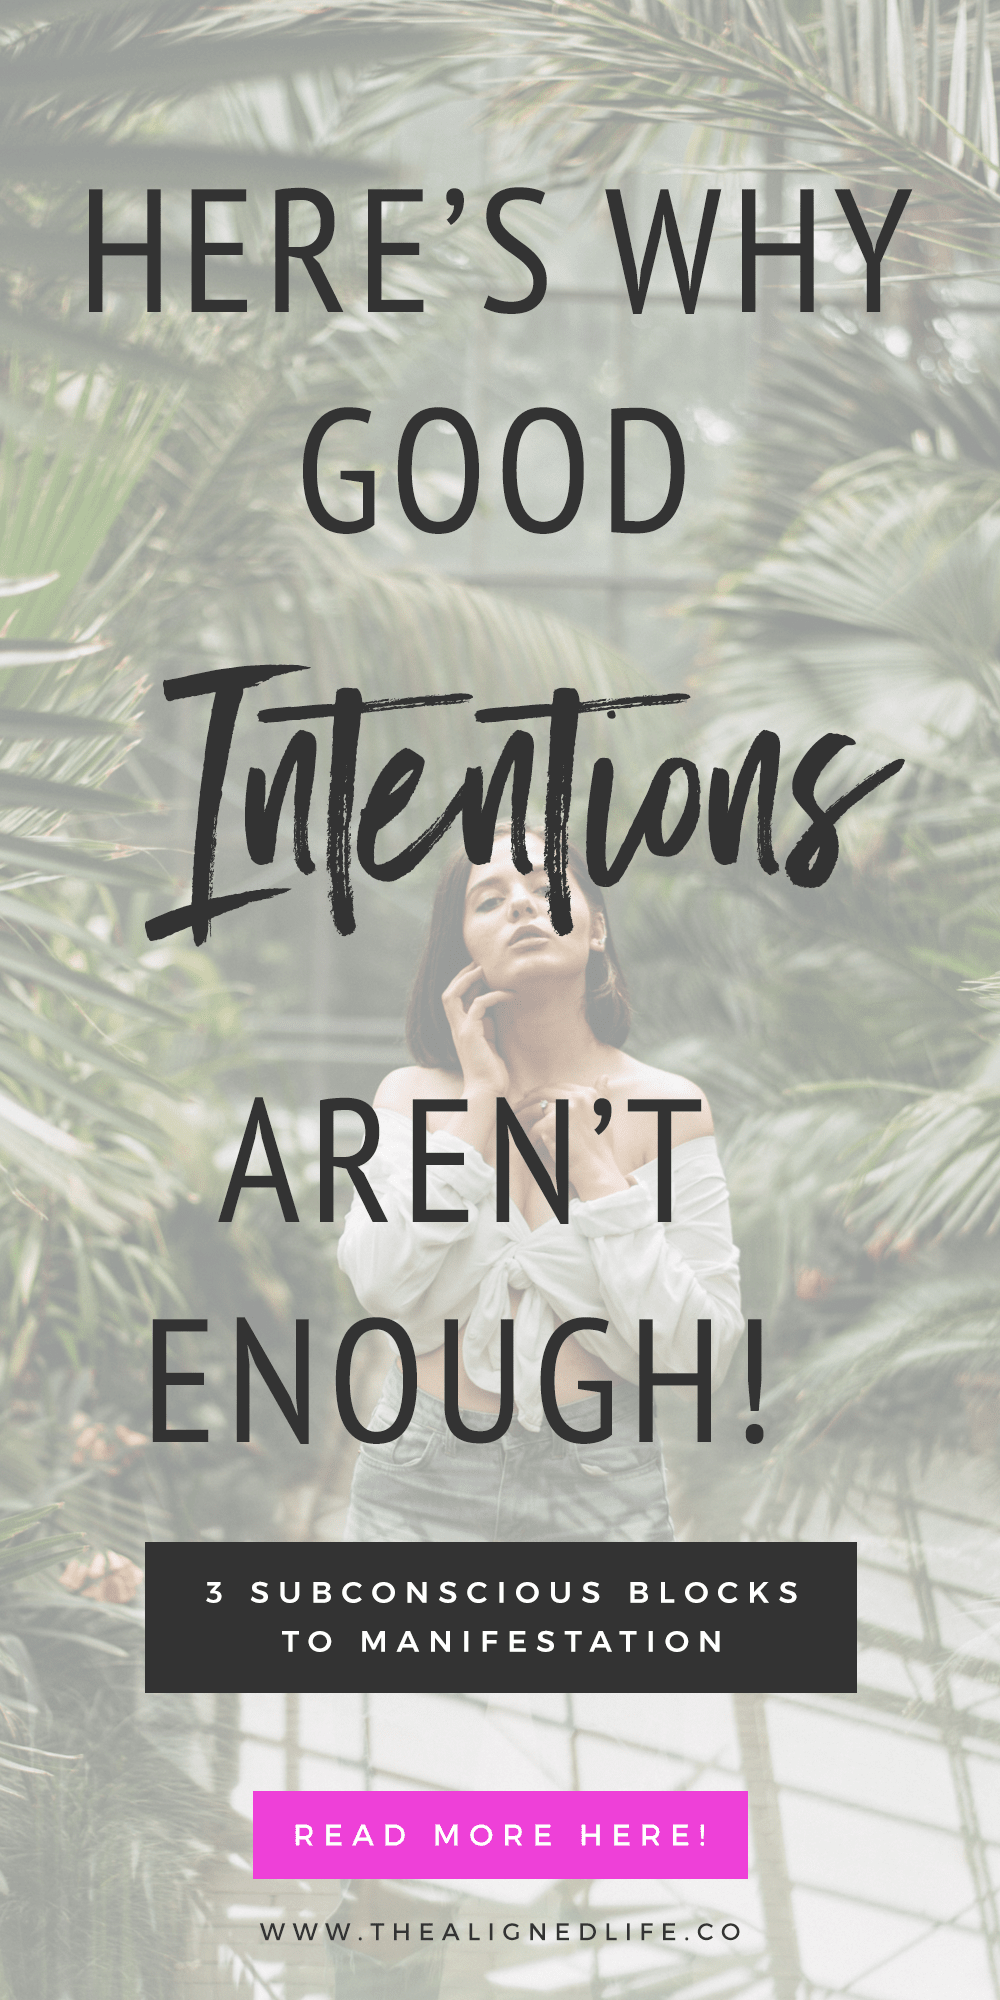 Why Good Intentions Aren't Enough! 3 Subconscious Blocks To Manifestation